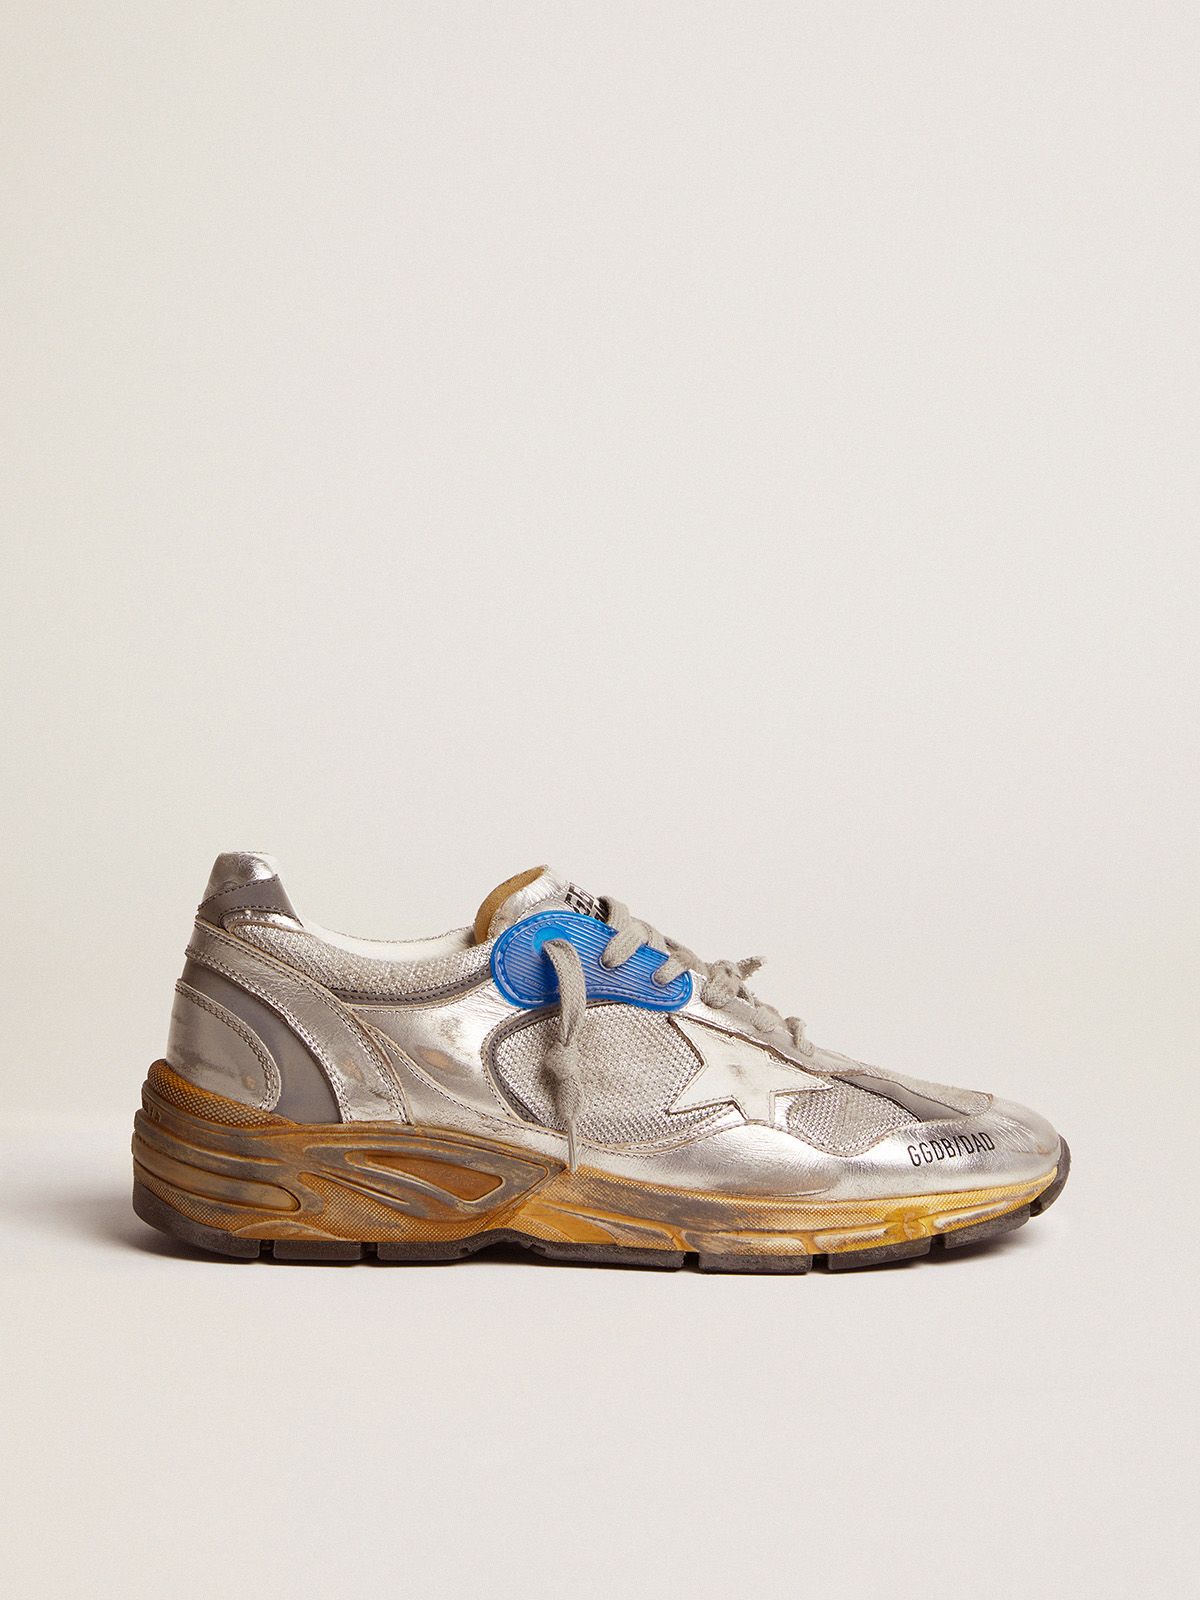 Goldengoose Ball Star Silver Dad-Star sneakers with distressed finish